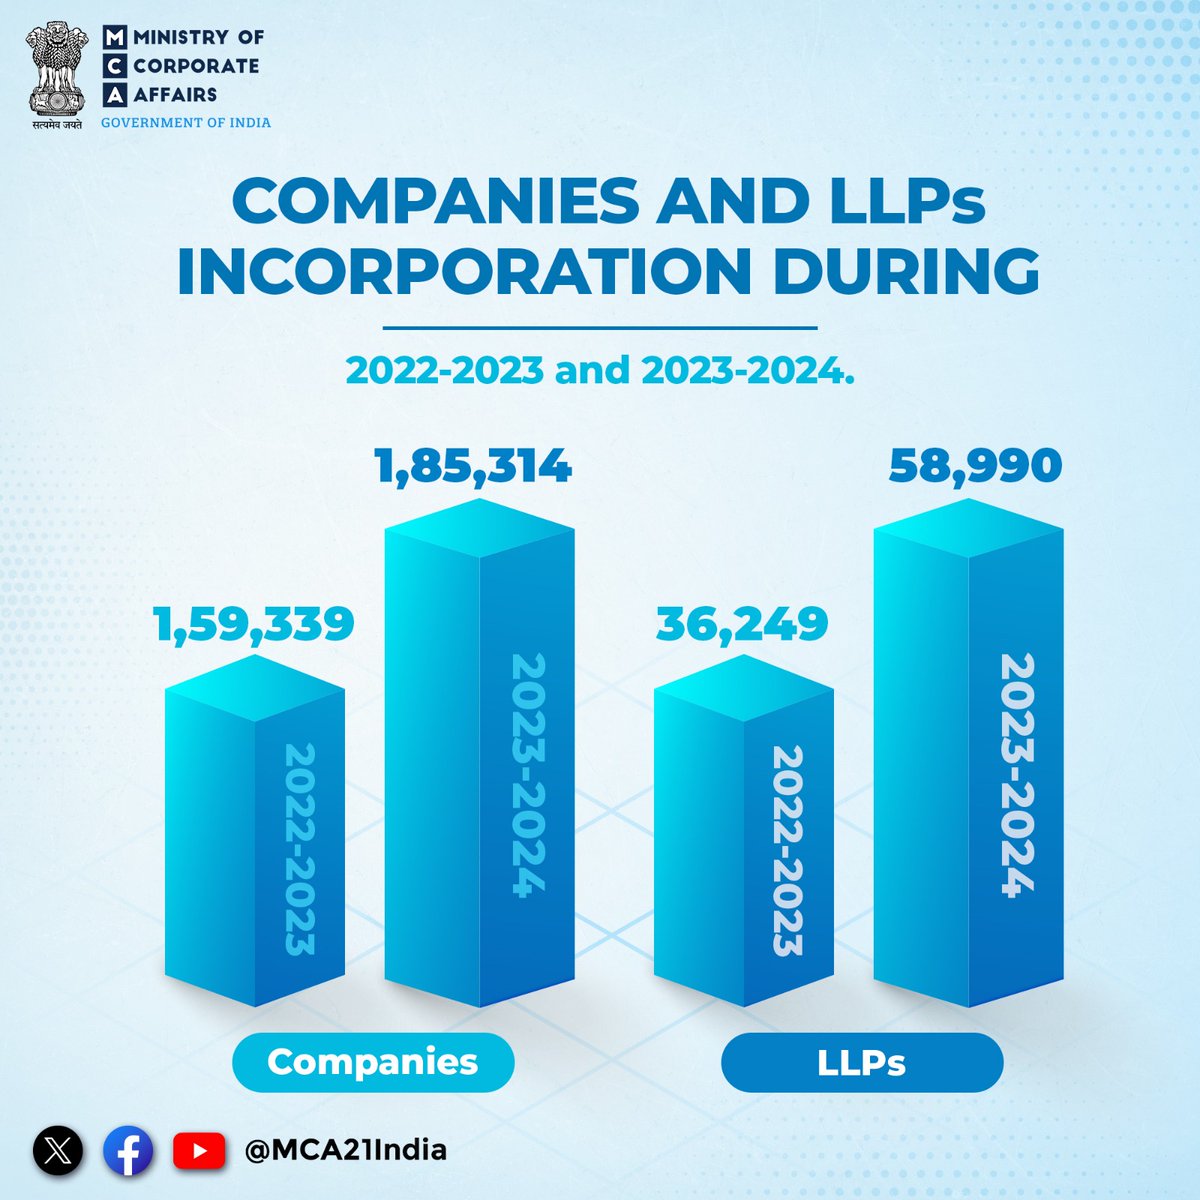 MCA records the highest number of incorporations during 2023-2024, surpassing any of the previous financial years. #MCA #MinistryOfCorporateAffairs #Growth #CompanyIncorporation #LLPExpansion #LLP #Incorporation